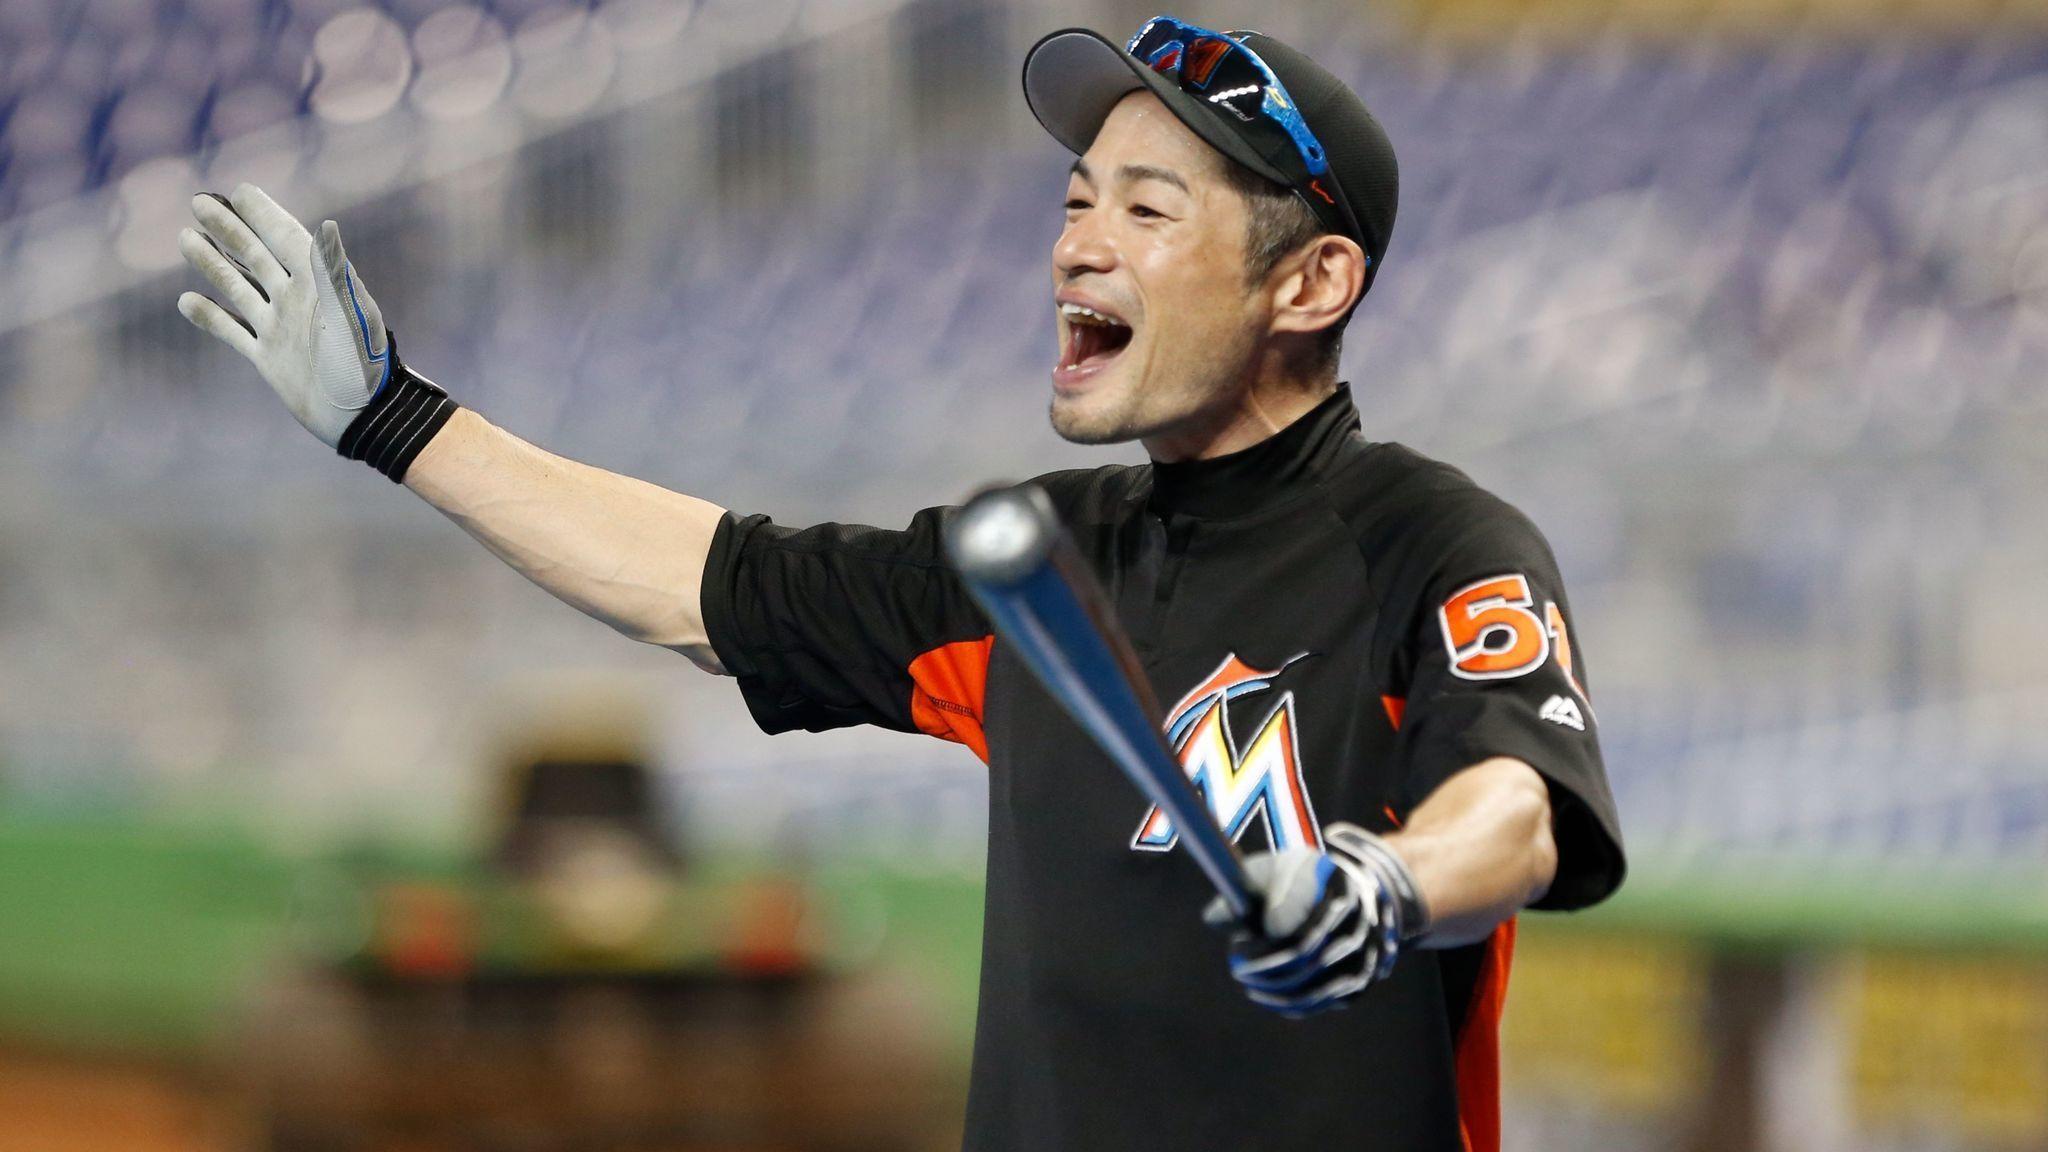 Ichiro Suzuki, on brink of more history, says he wants to be a